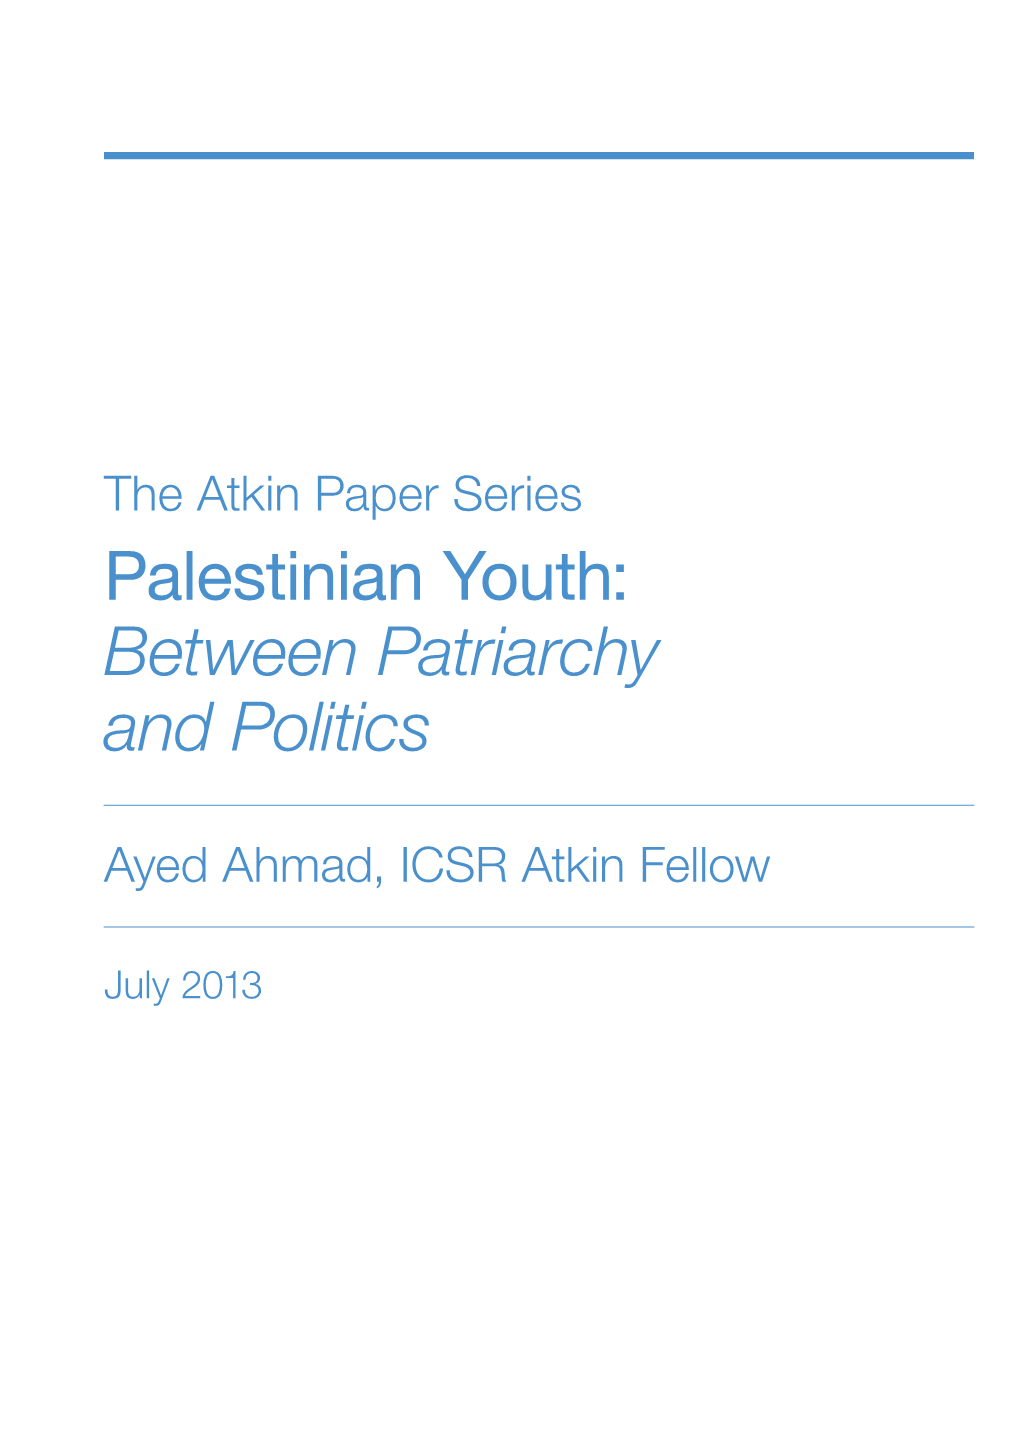 Palestinian Youth: Between Patriarchy and Politics